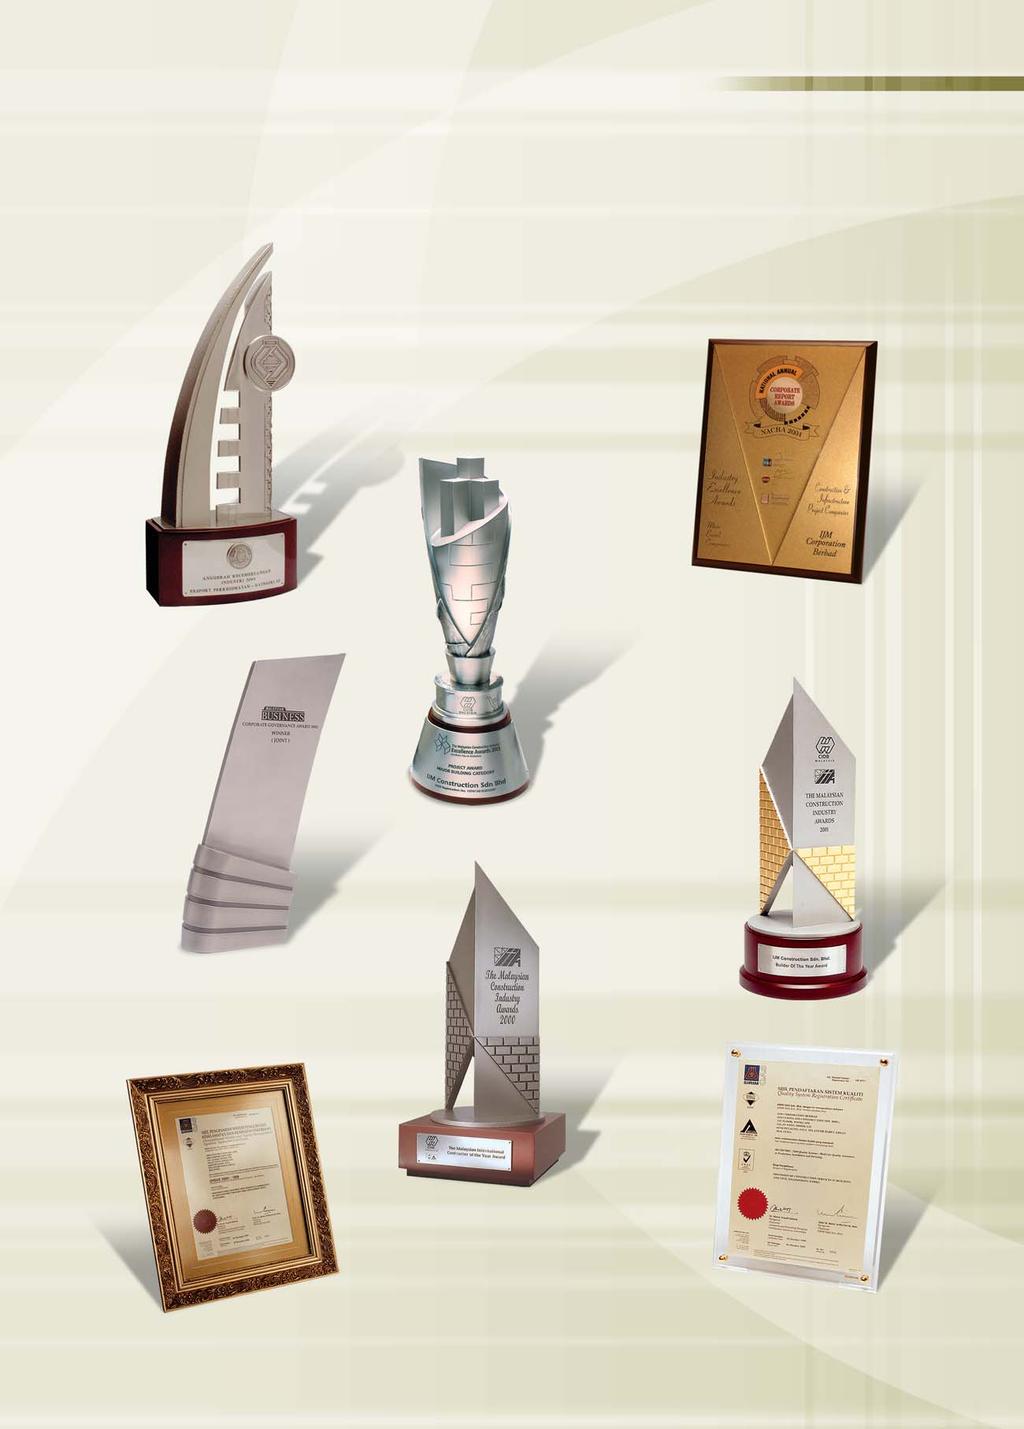 PENGANUGERAHAN & PENGIKTIRAFAN EXPORT EXCELLENCE AWARD 2003 (SERVICES) Ministry of International Trade and Industry NATIONAL ANNUAL CORPORATE REPORT AWARD 2003 Industry Excellence Awards, Main Board